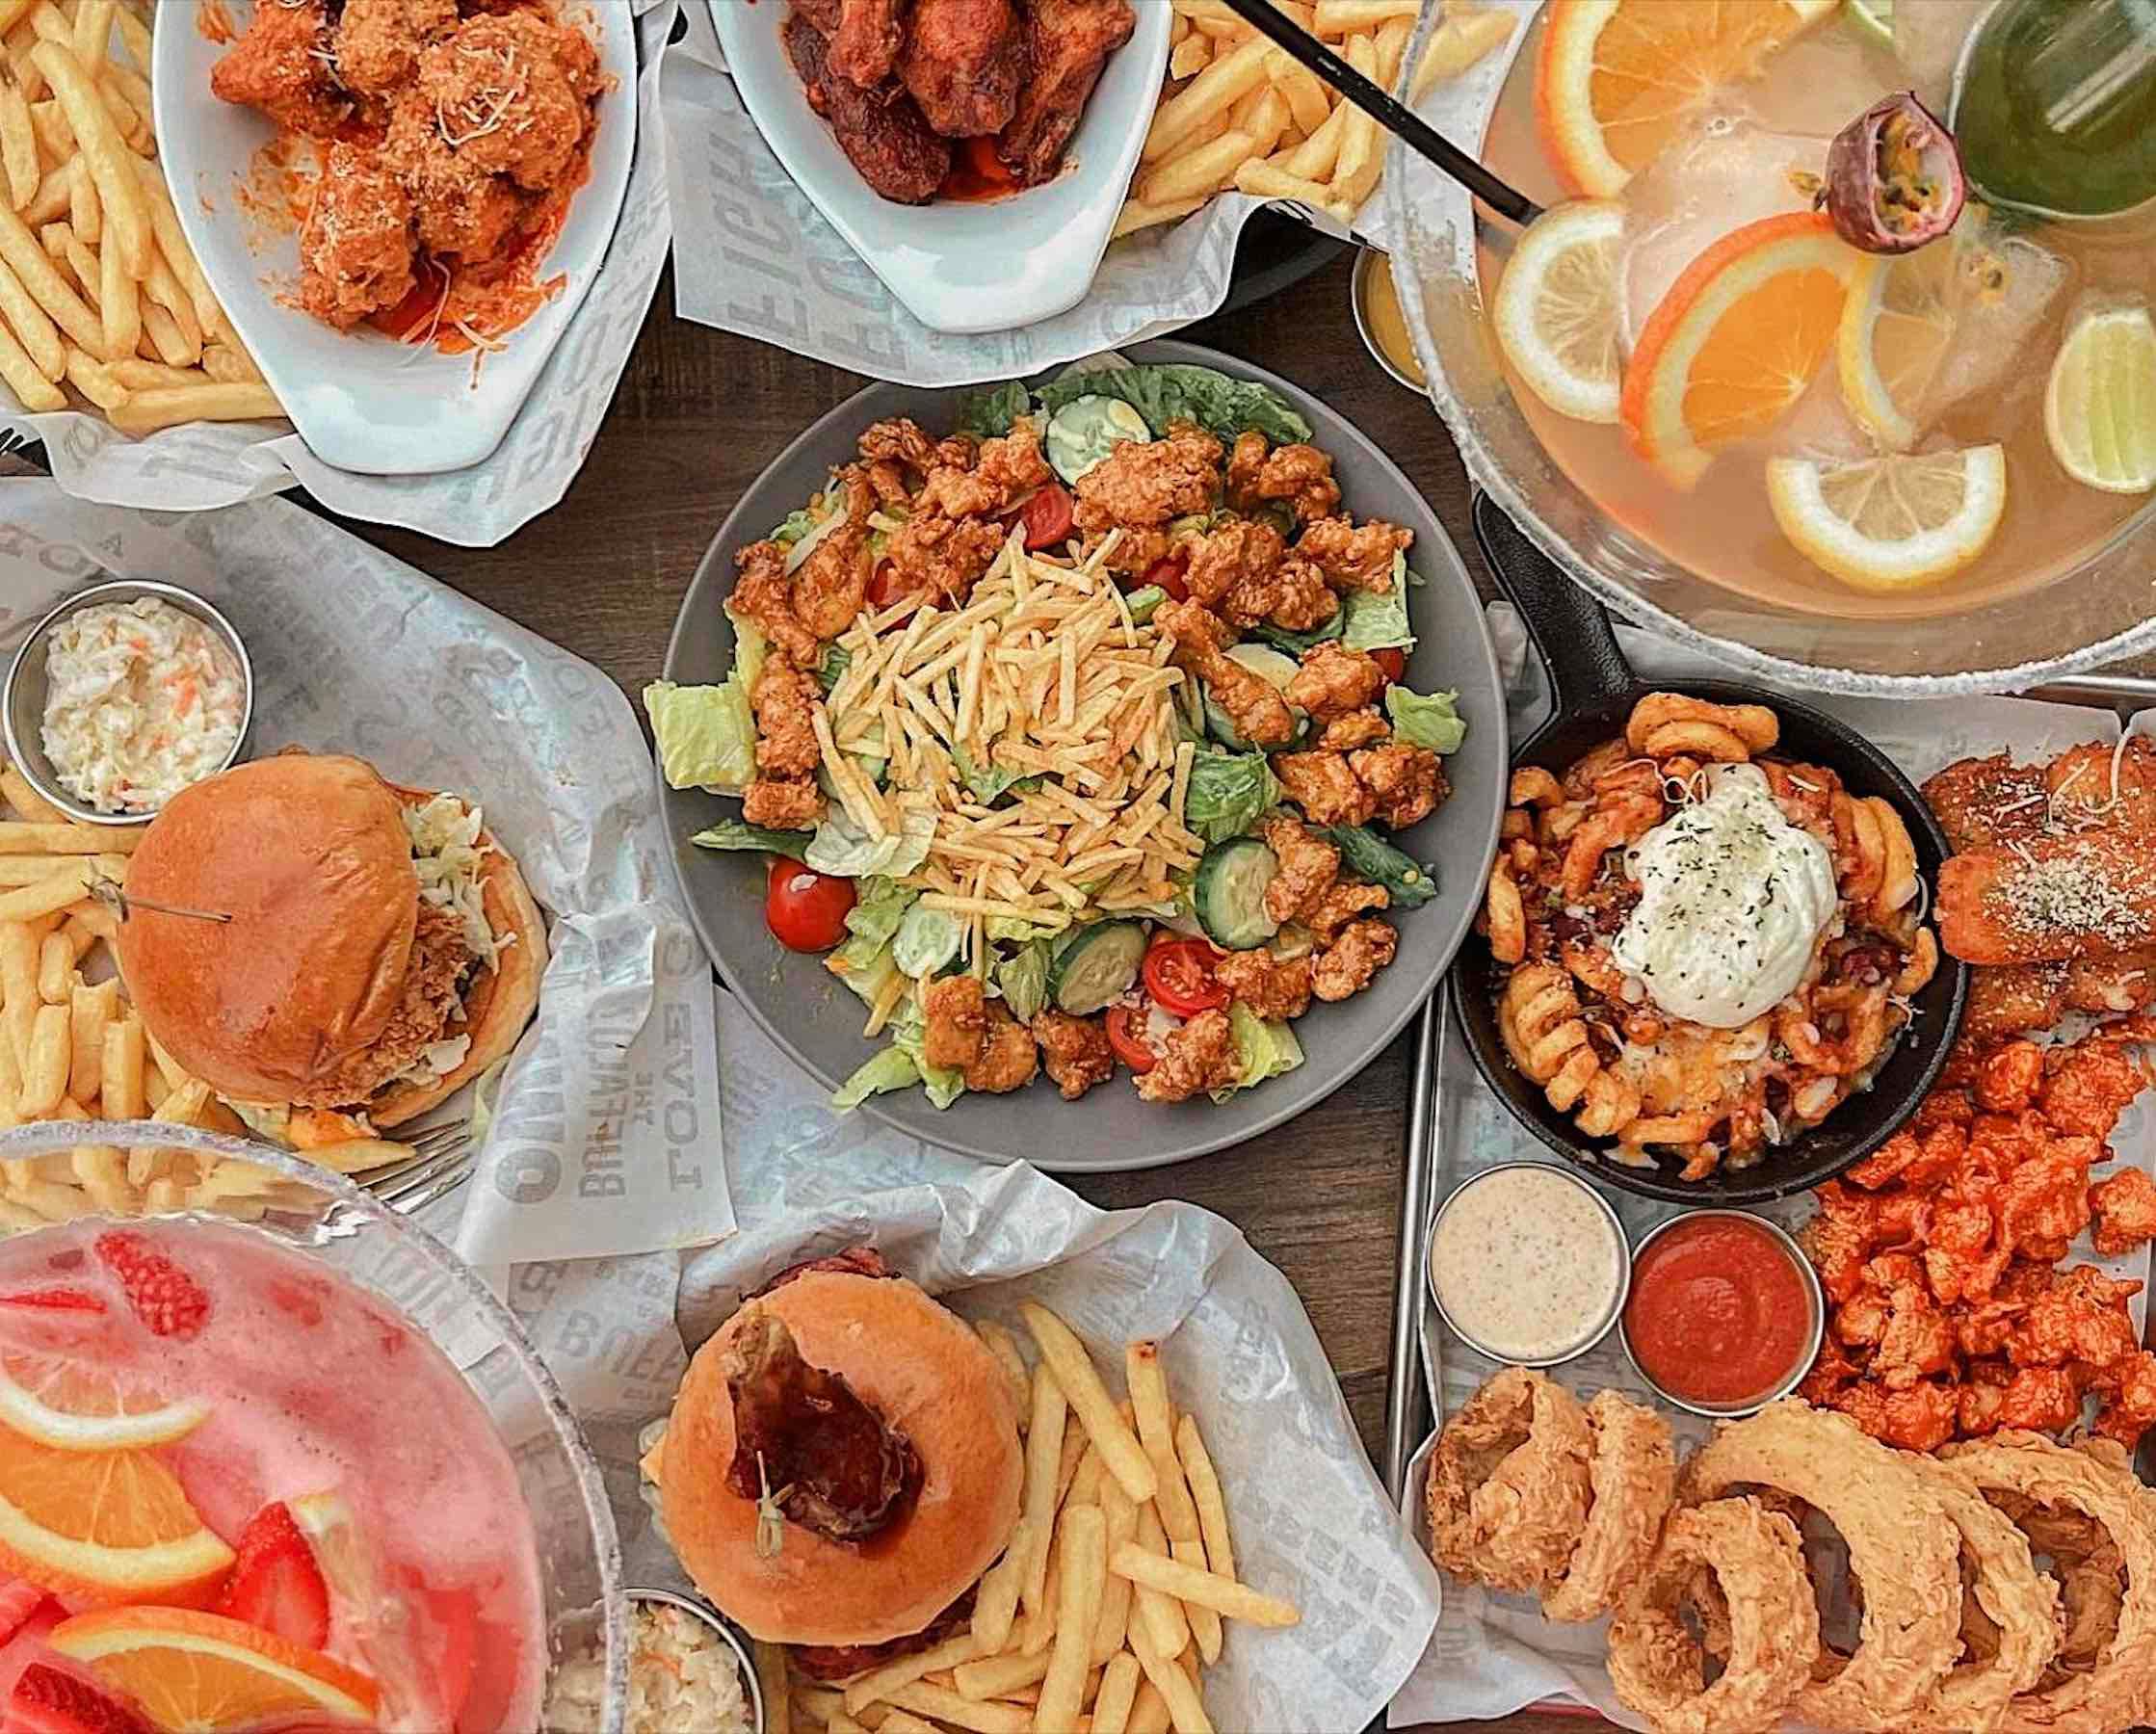 Buffalo Wings & Rings introduces 9 sizzling summer offers